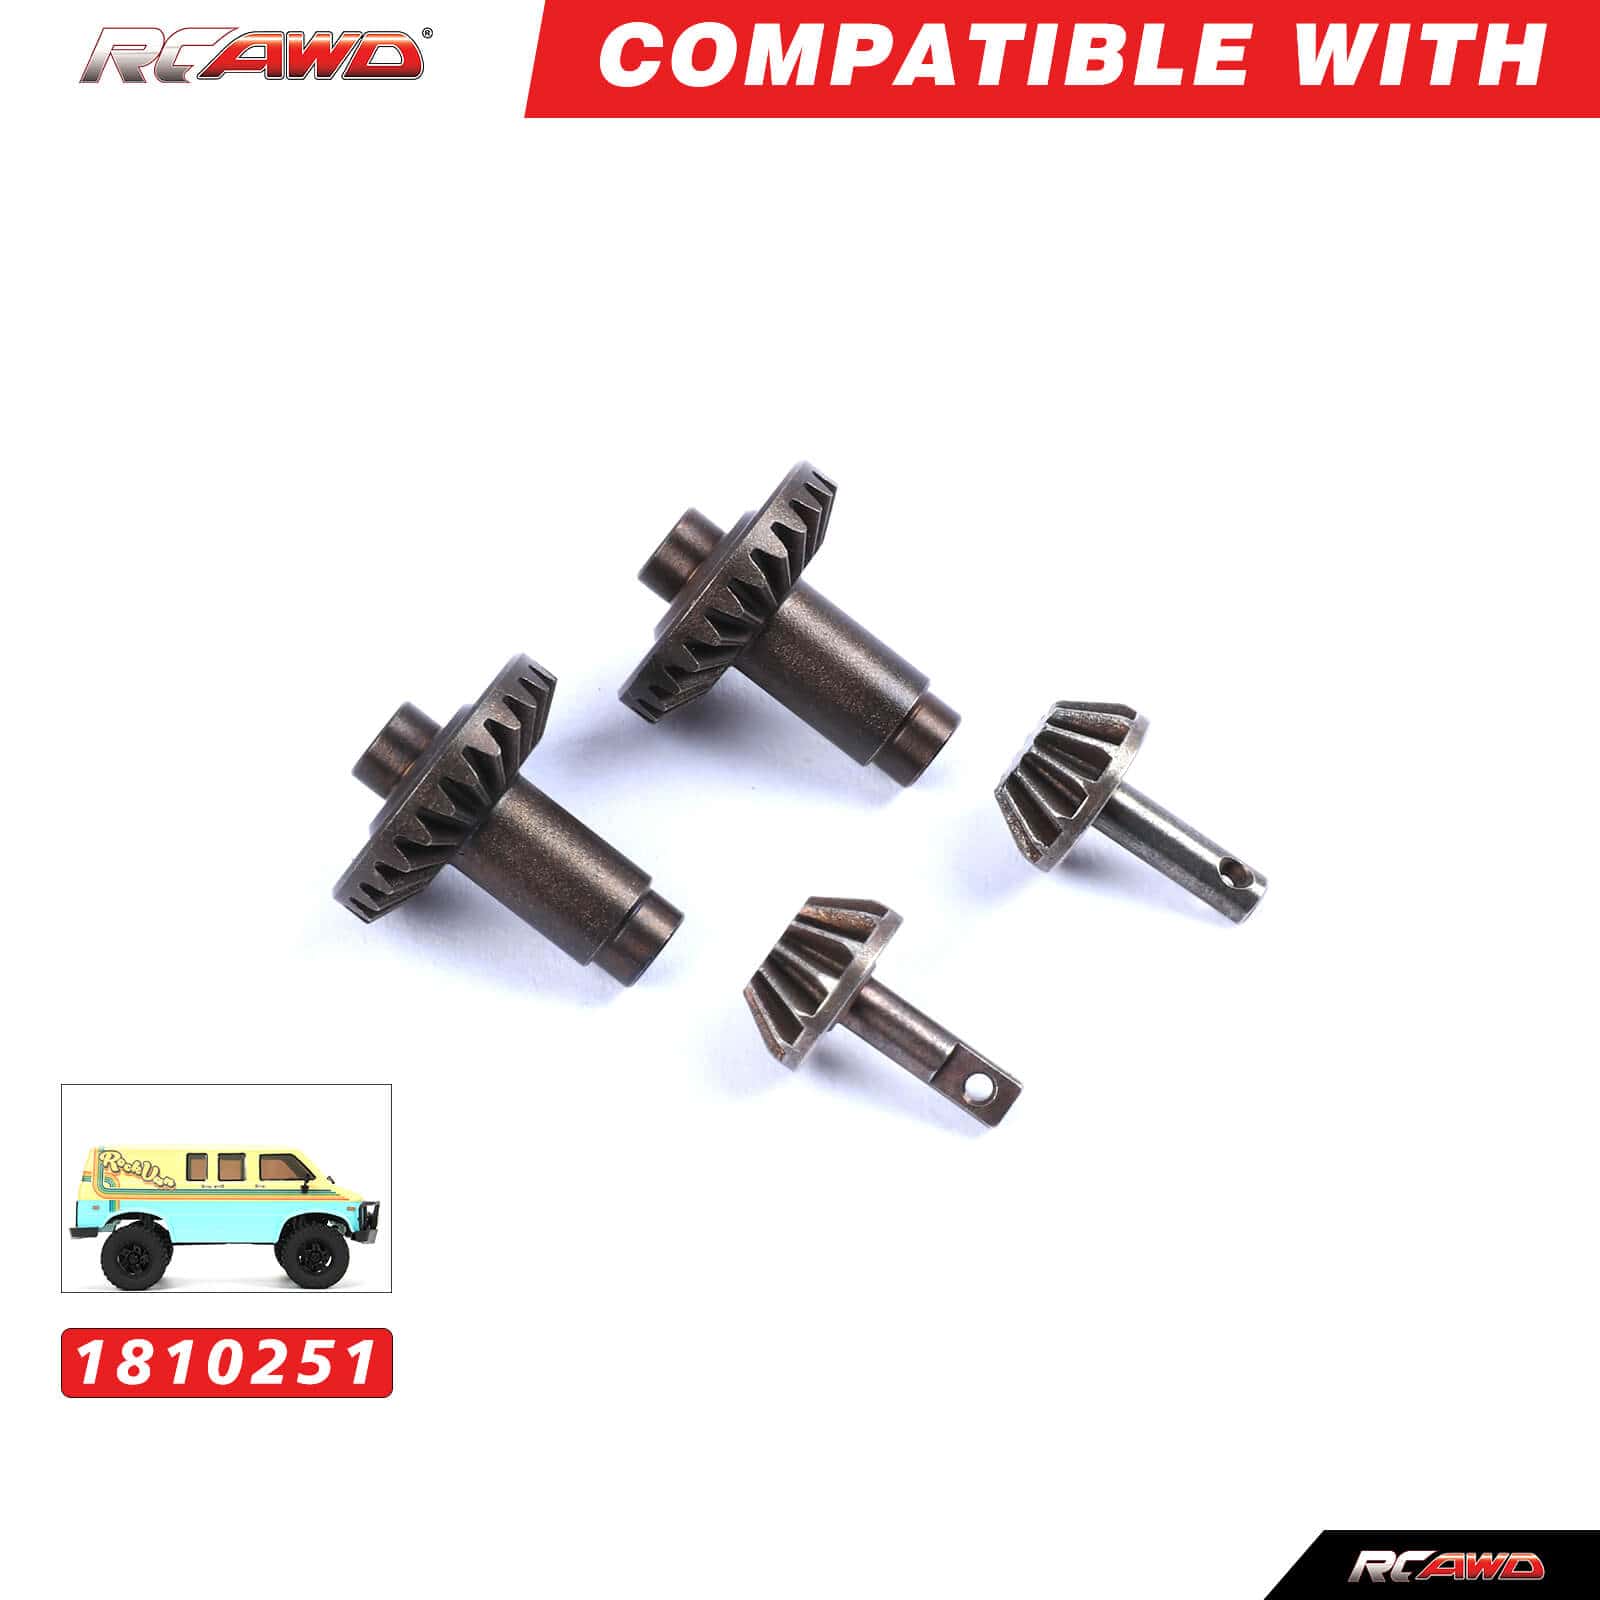 RCAWD HobbyPlus CR18 Upgrades Front and Rear Portal Axles Gears - RCAWD